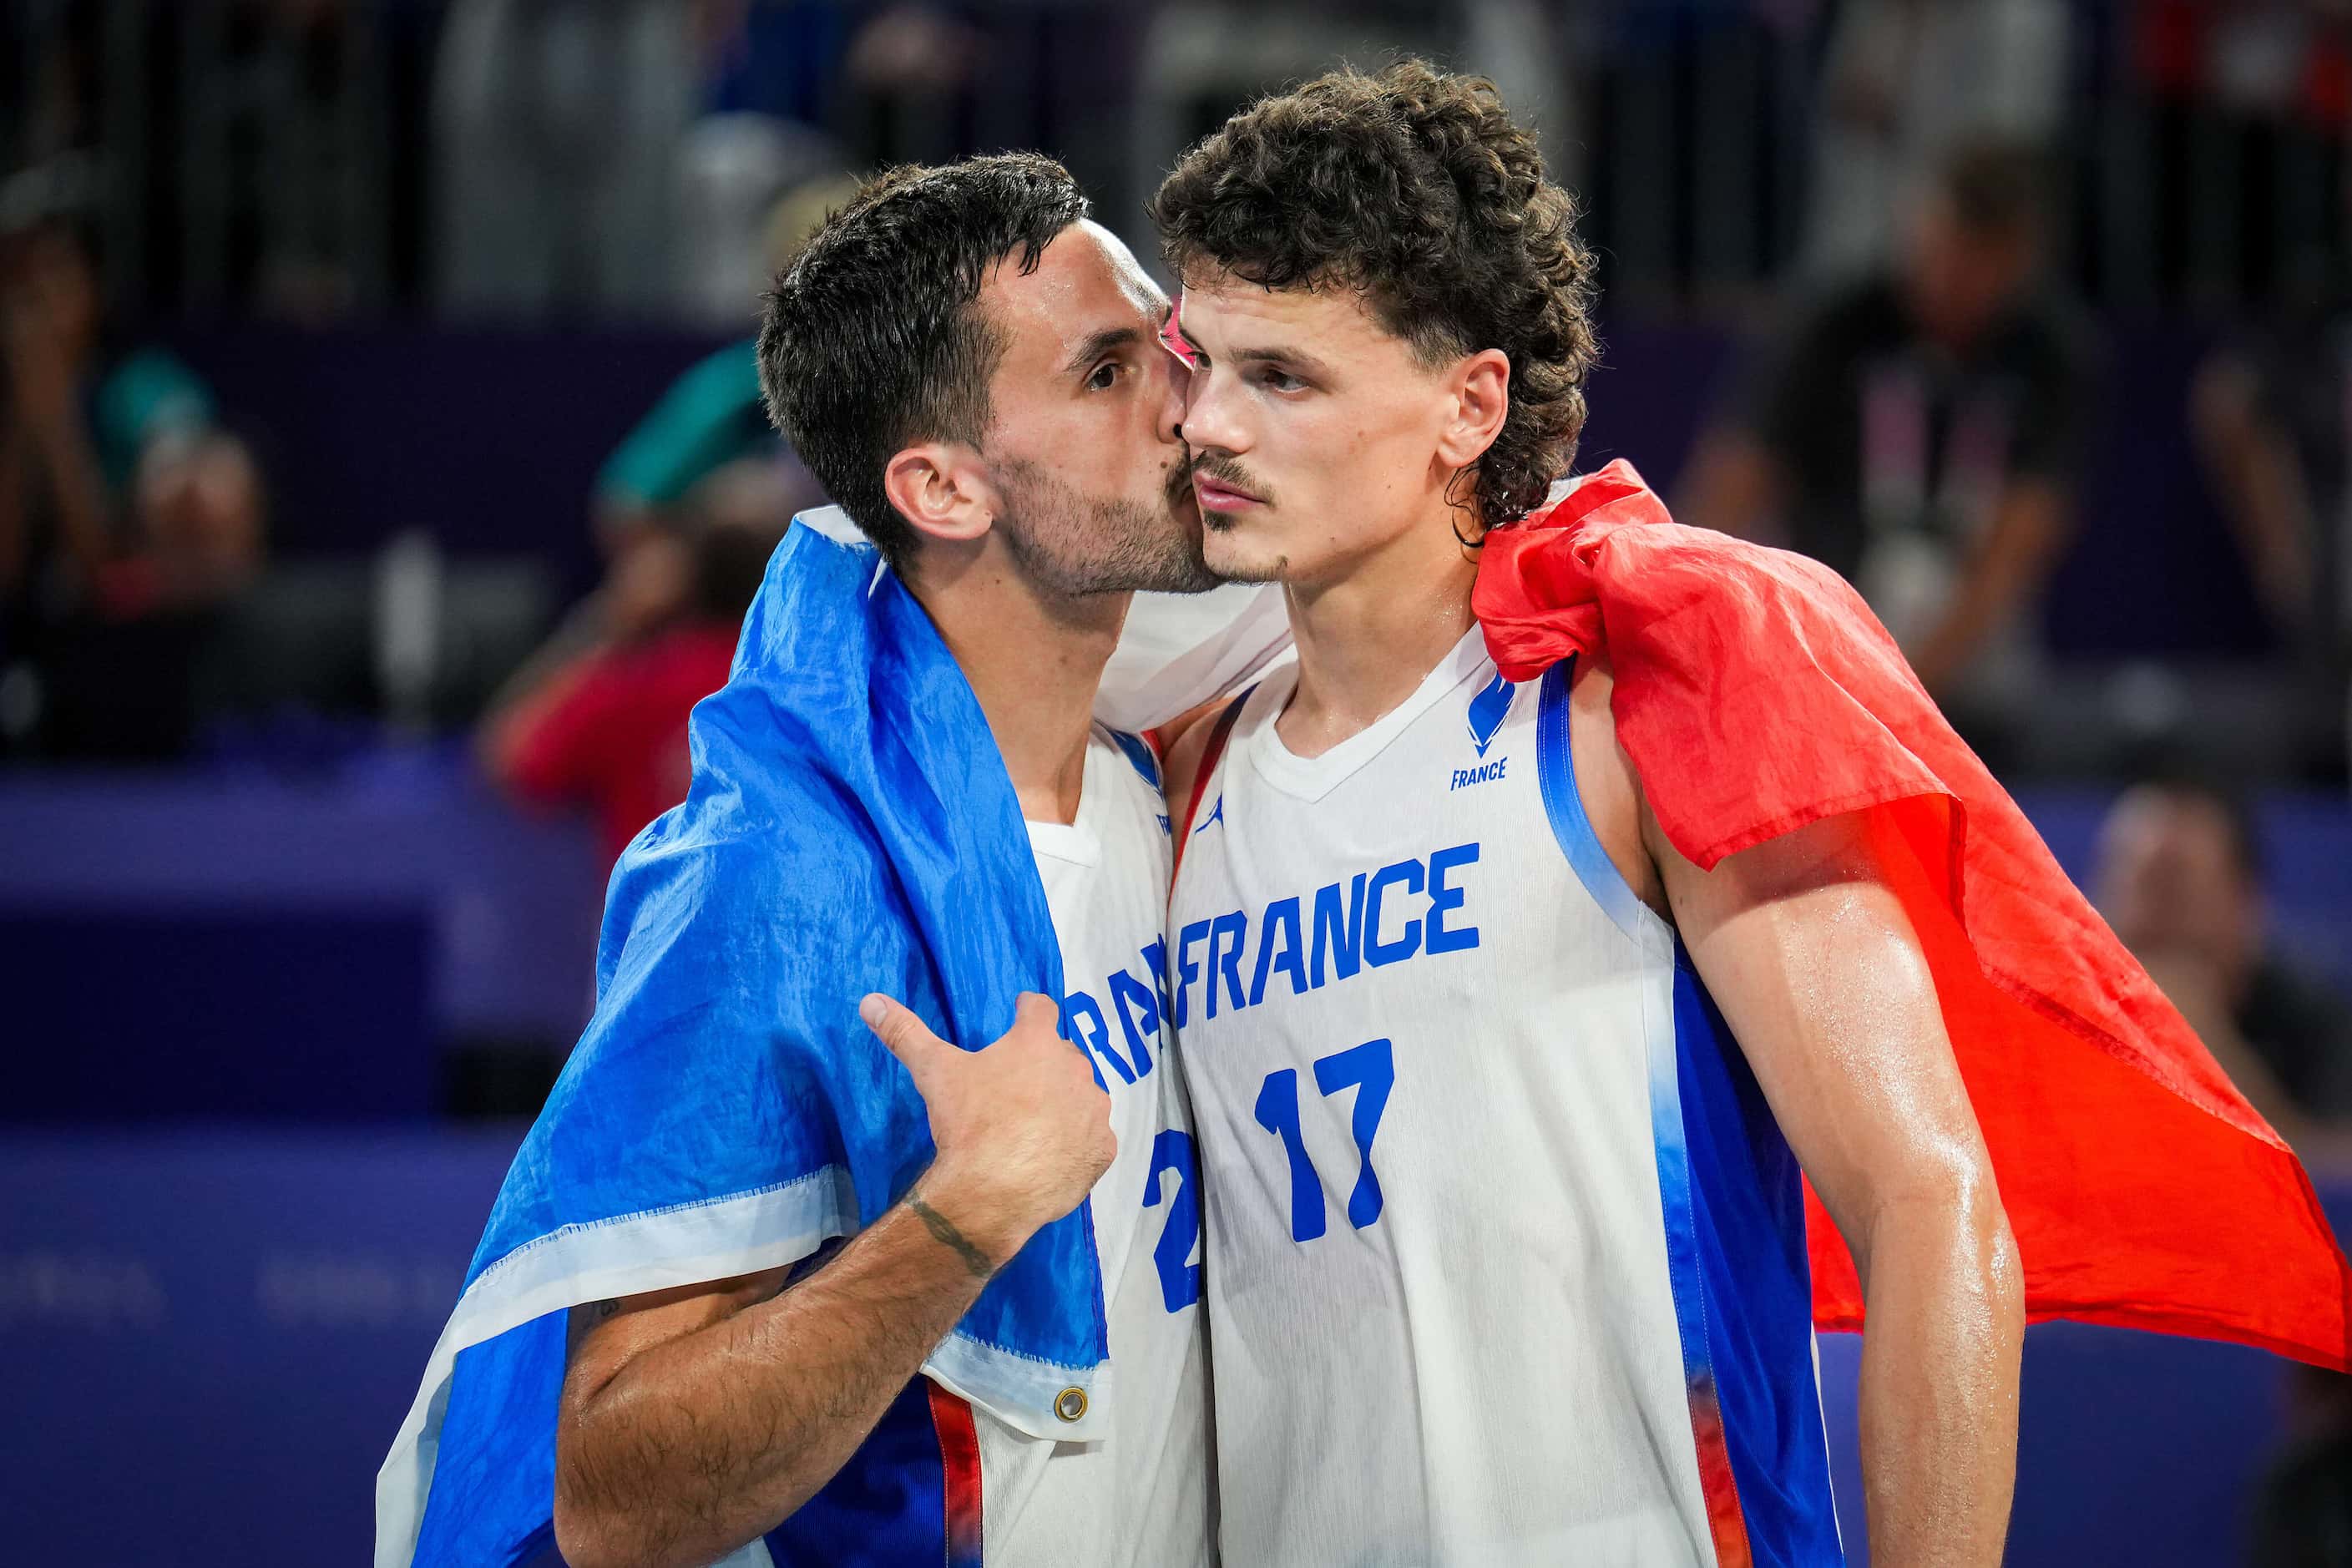 Jules Rambaut (17) of France gets a kiss from teammate Franck Seguela (21) after a loss to...